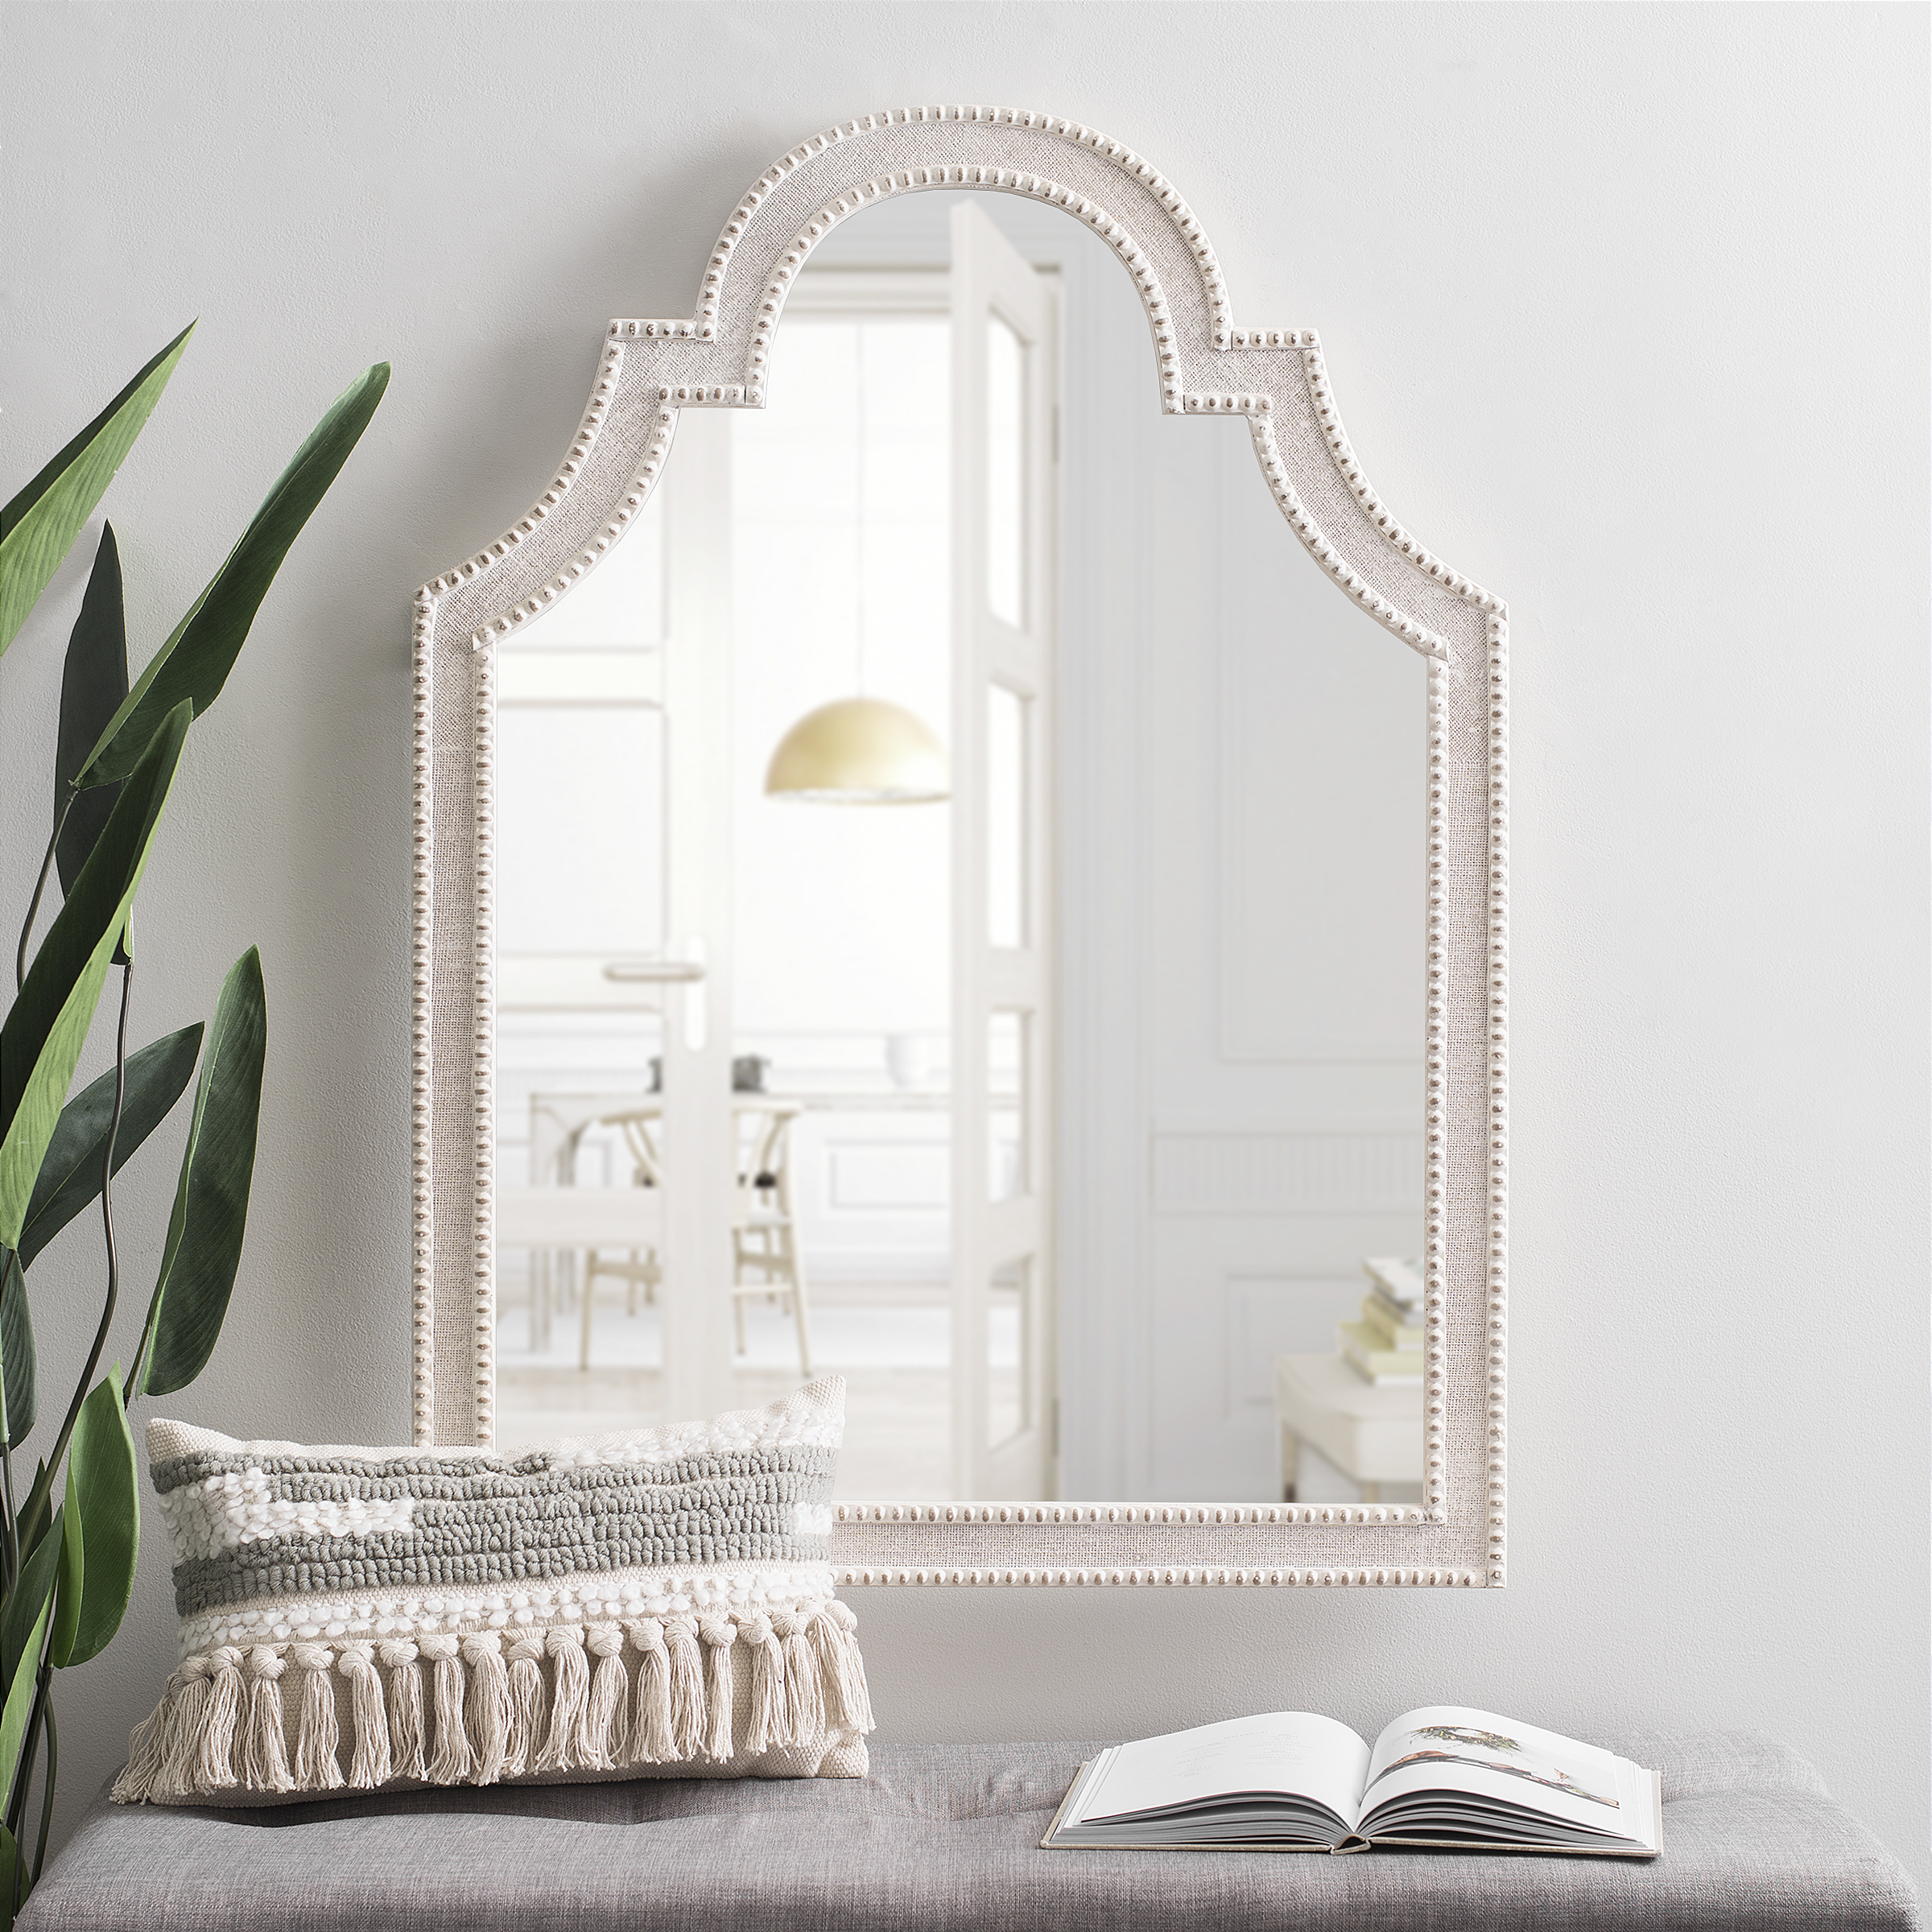 "I love the shape and detail of this mirror. Perfect for getting one last glance before you're out the door!"